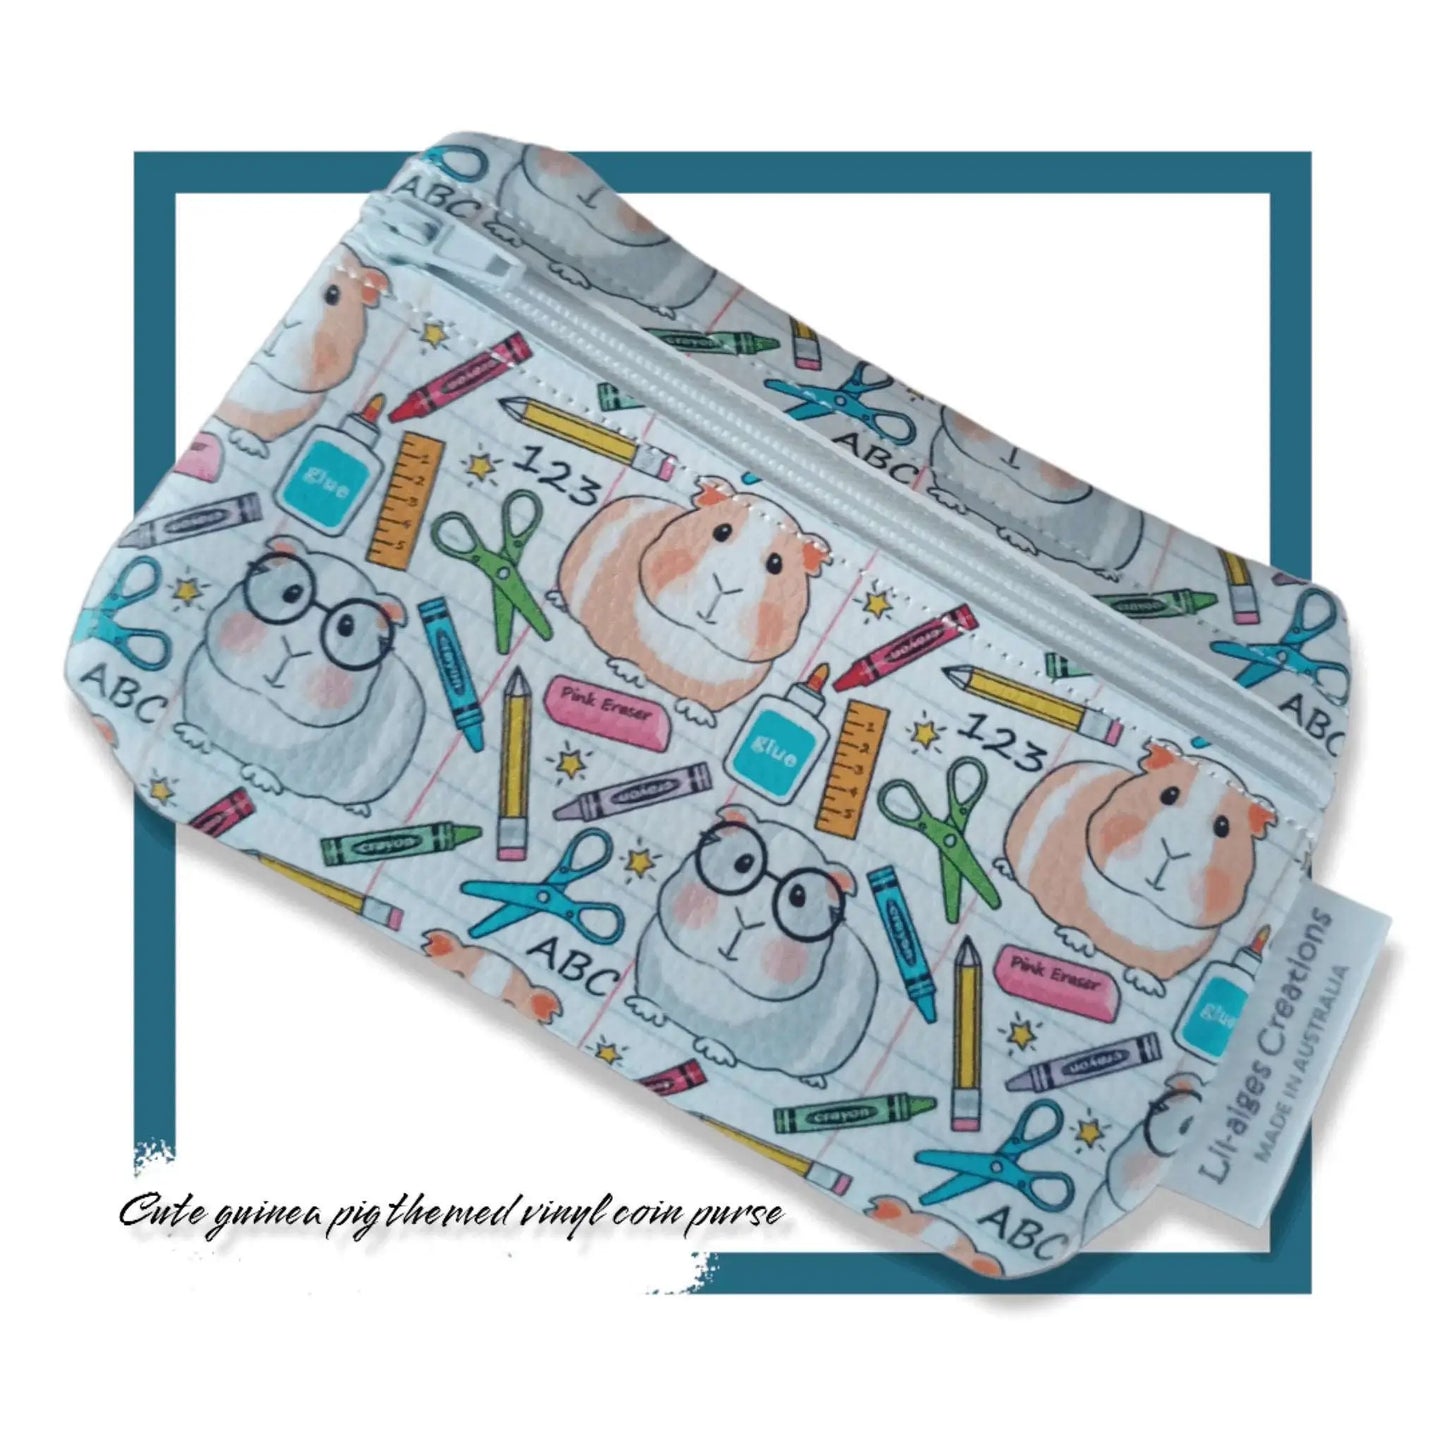 Cute guinea pig themed vinyl coin purse with zipper pull options, made in Australia - Lil-aiges Creations - Quality Australian-made Gifts